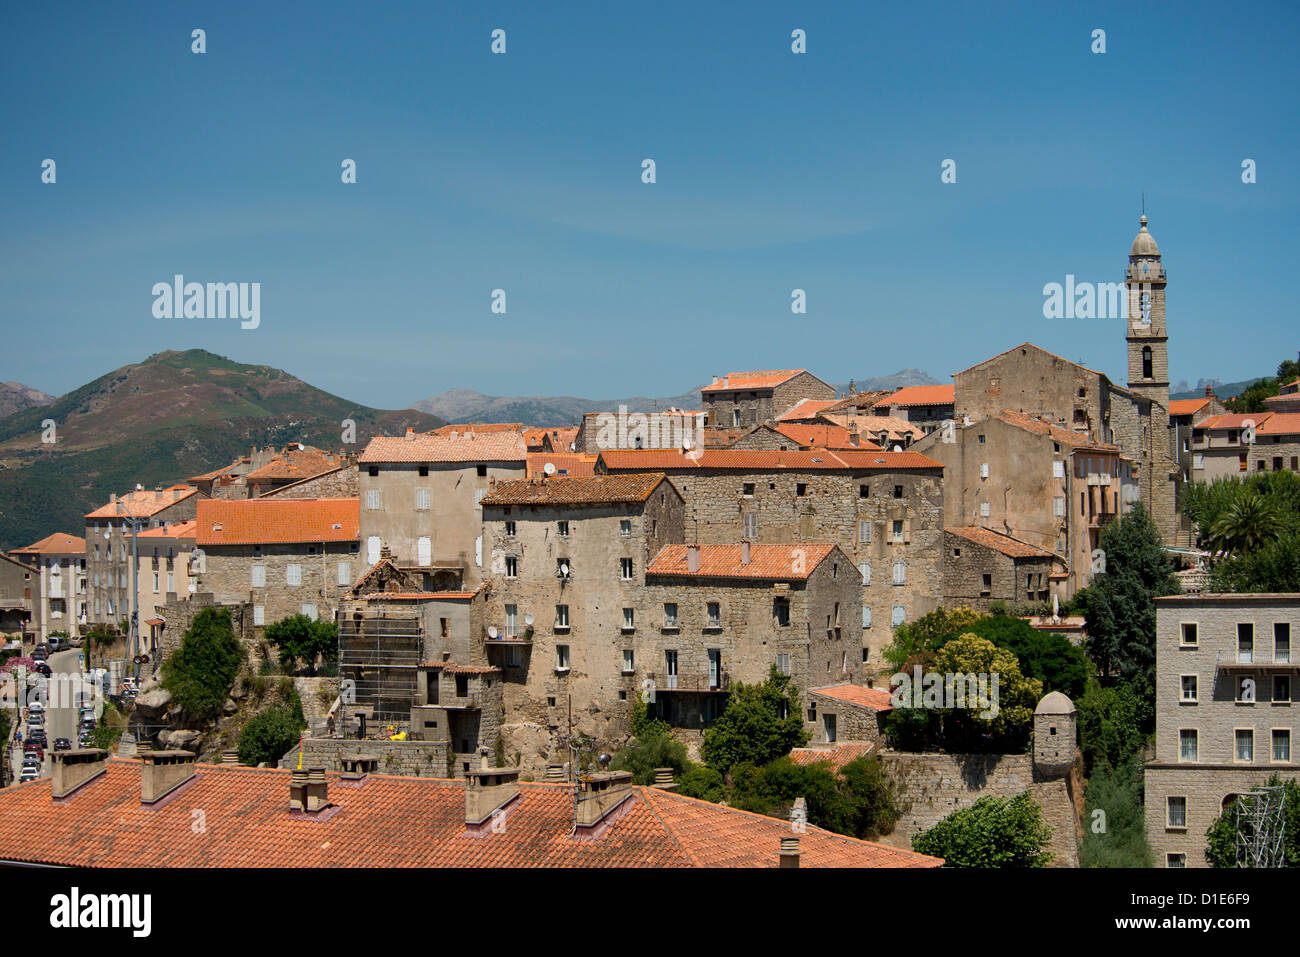 A view of the town of Sartene in the Sartenais region of Corsica, France, Europe Stock Photo